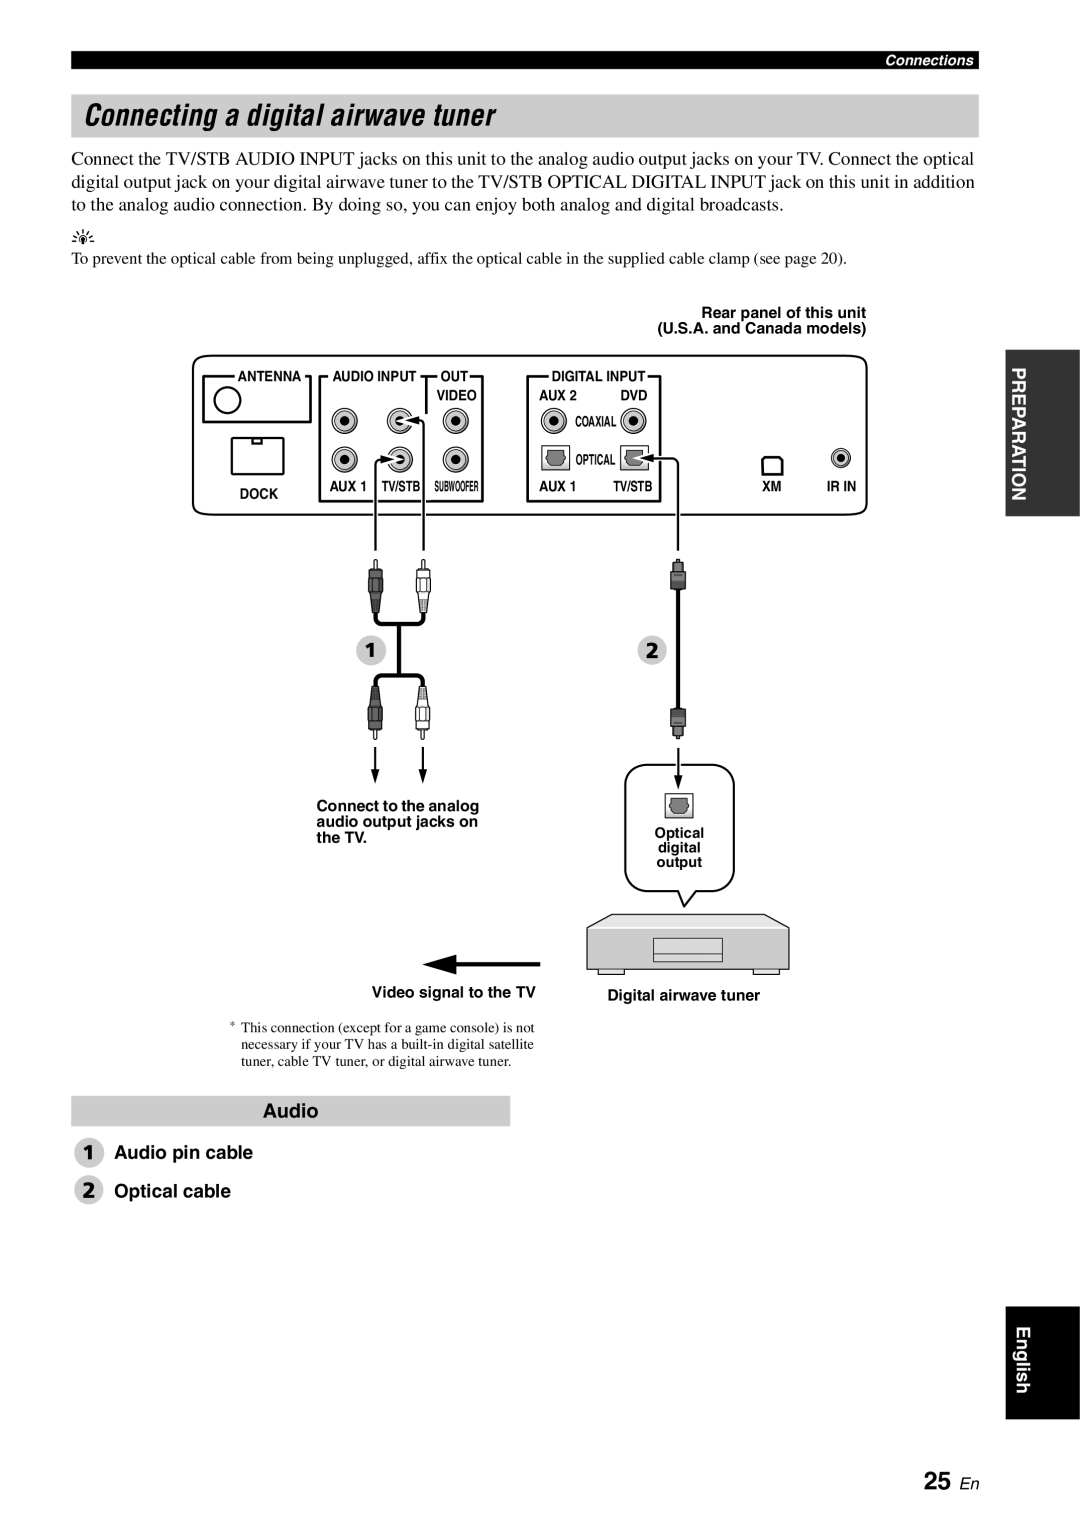 Yamaha YSP-3000 owner manual Connecting a digital airwave tuner, 25 En, Audio pin cable Optical cable 